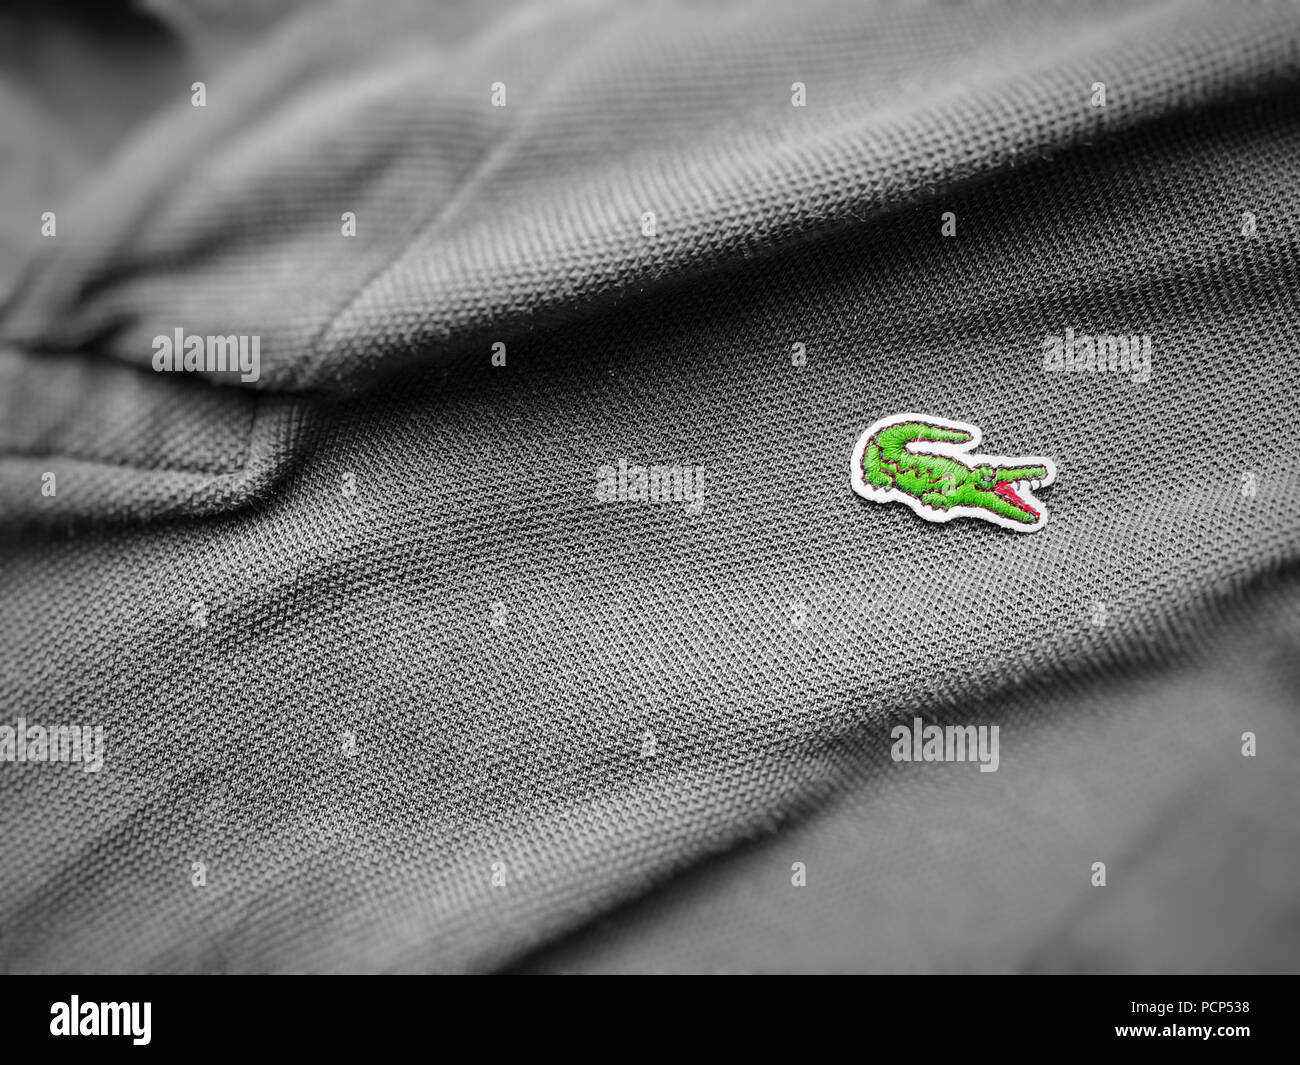 Rome, Italy, august 3rd 2018: close up view of a Lacoste grey polo shirt. Focus on the sewn crocodile Stock Photo